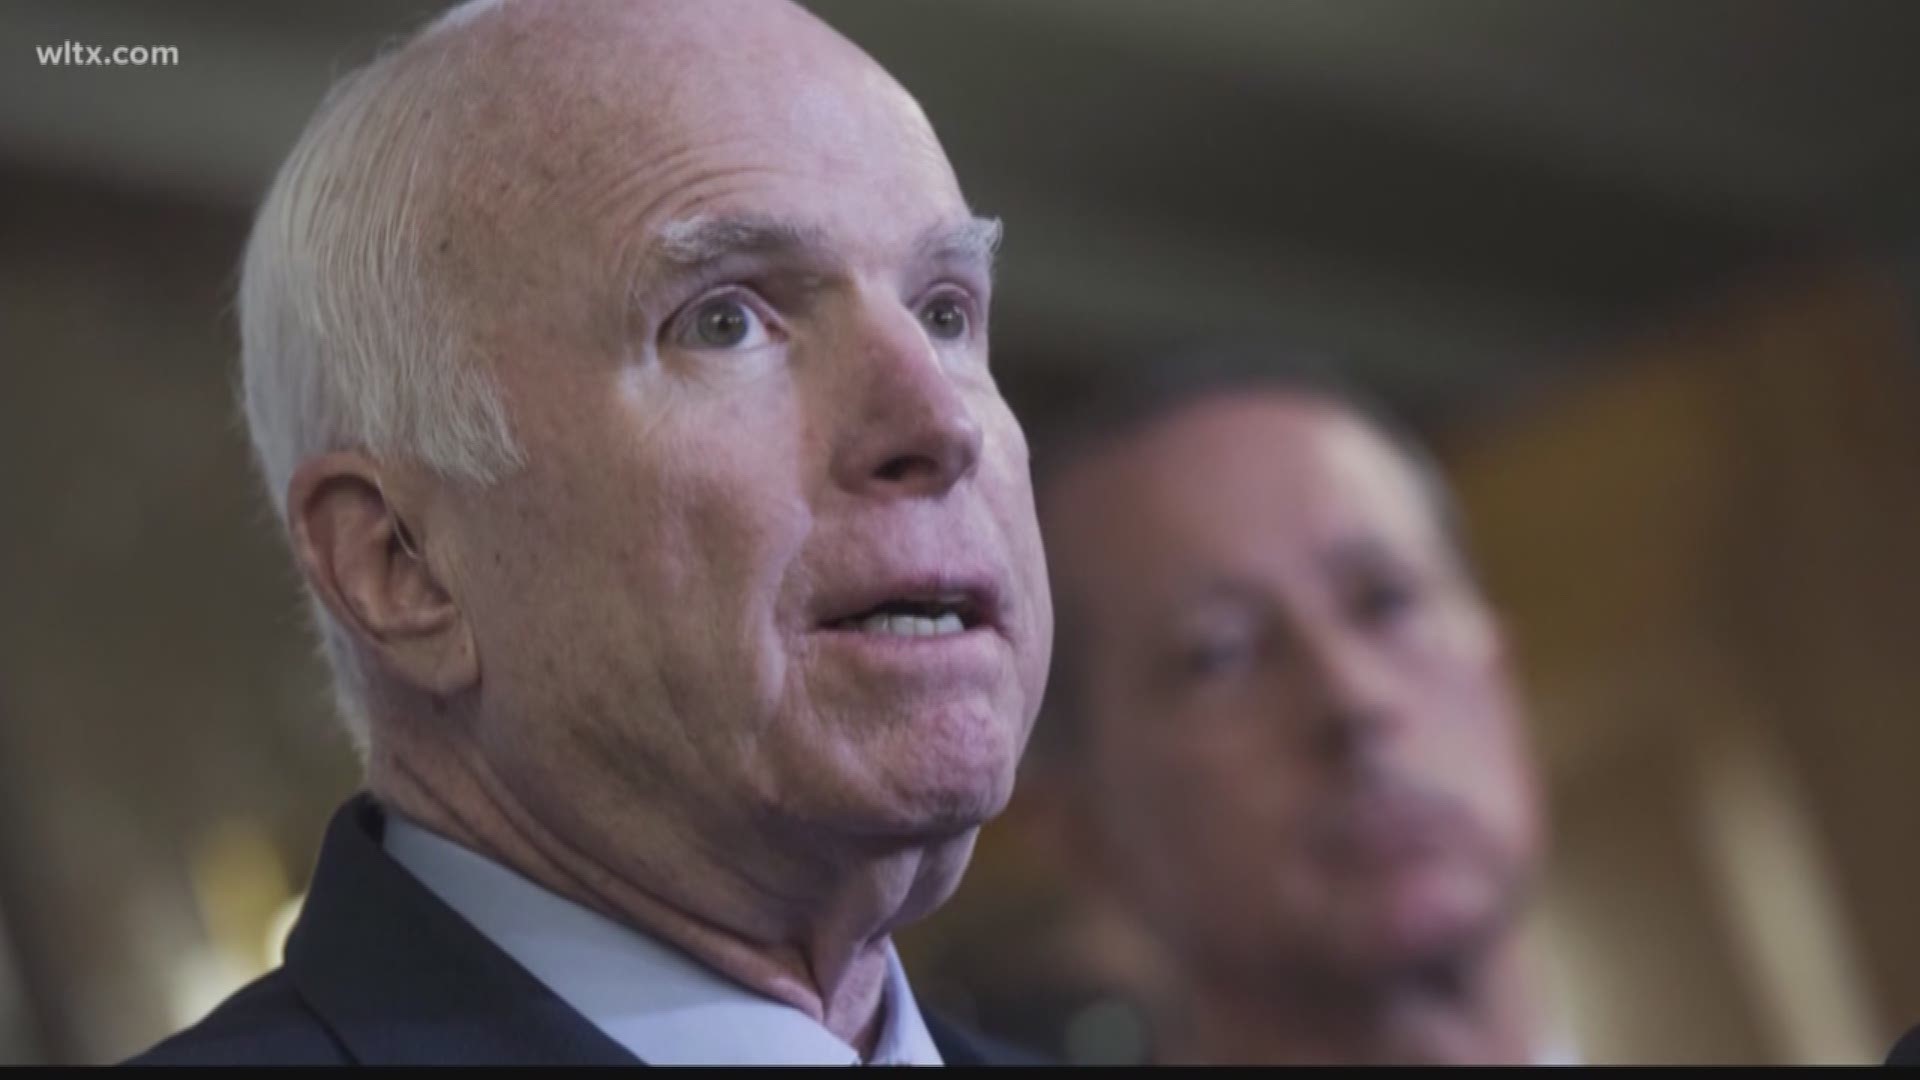 South Carolina Senator Lindsey Graham says Senator John McCain is going to "be with us for a while to come."